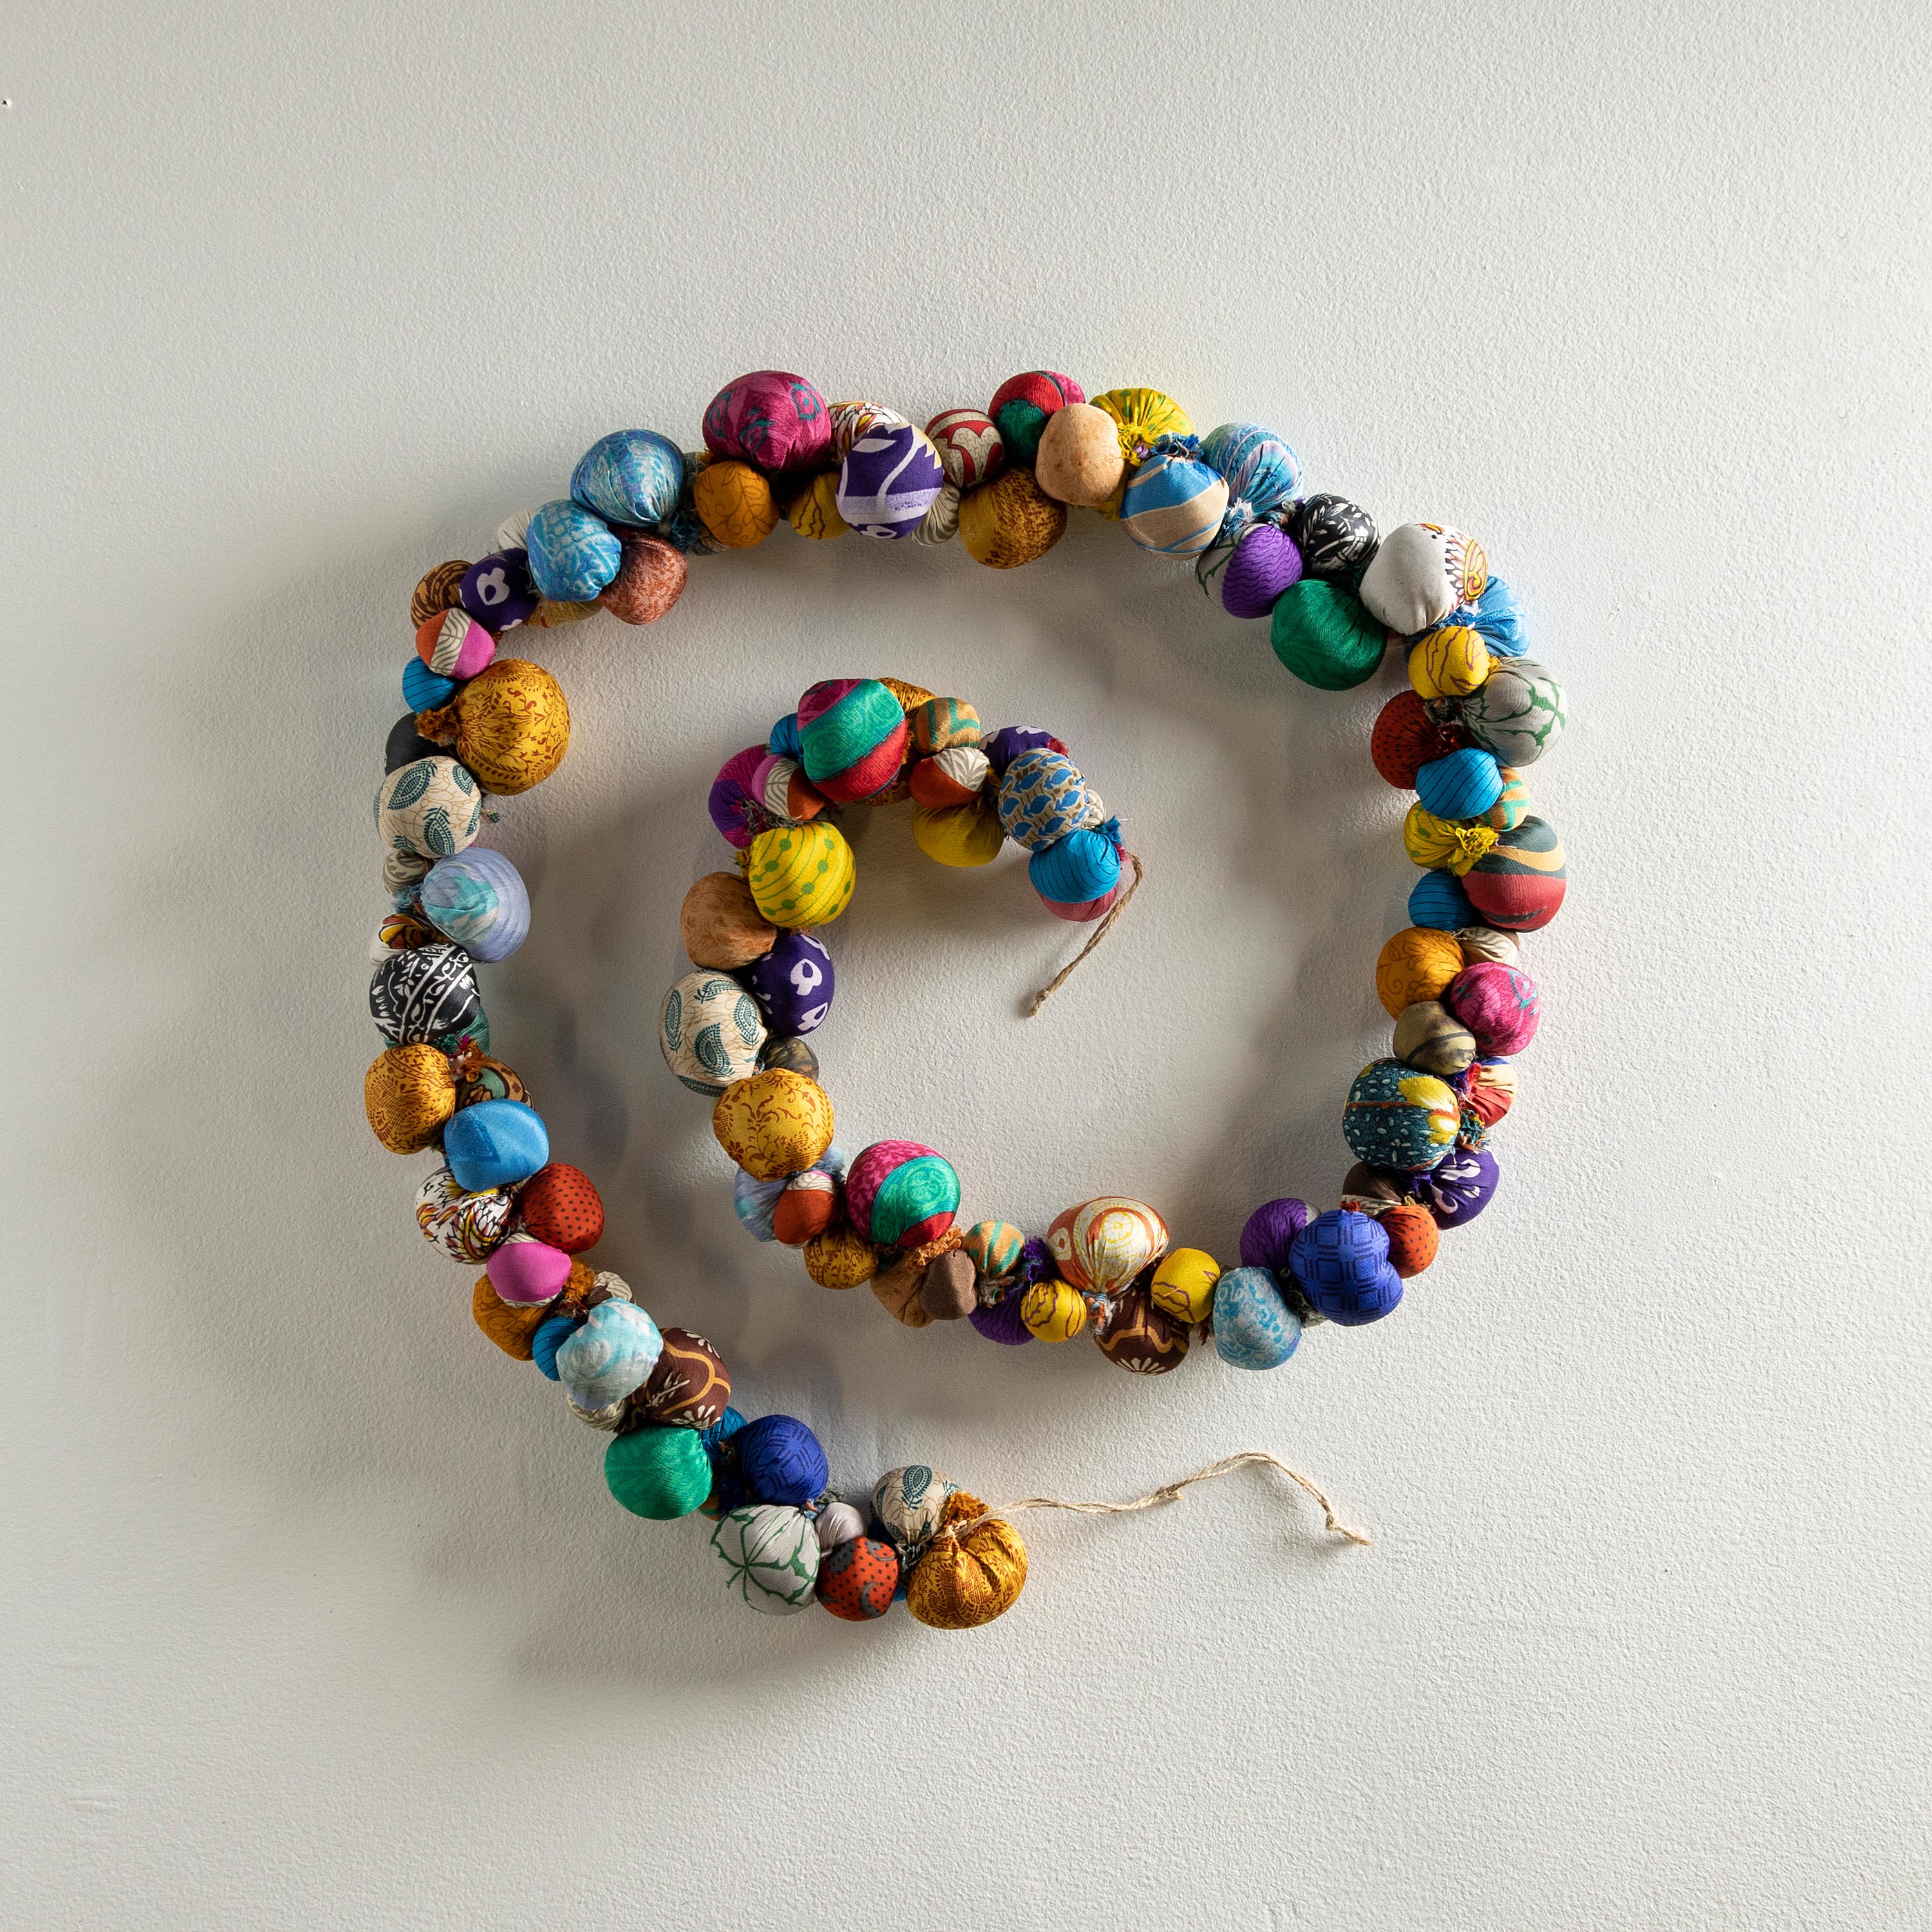 Handmade Garland with Multi-colored Clay beads + Natural White